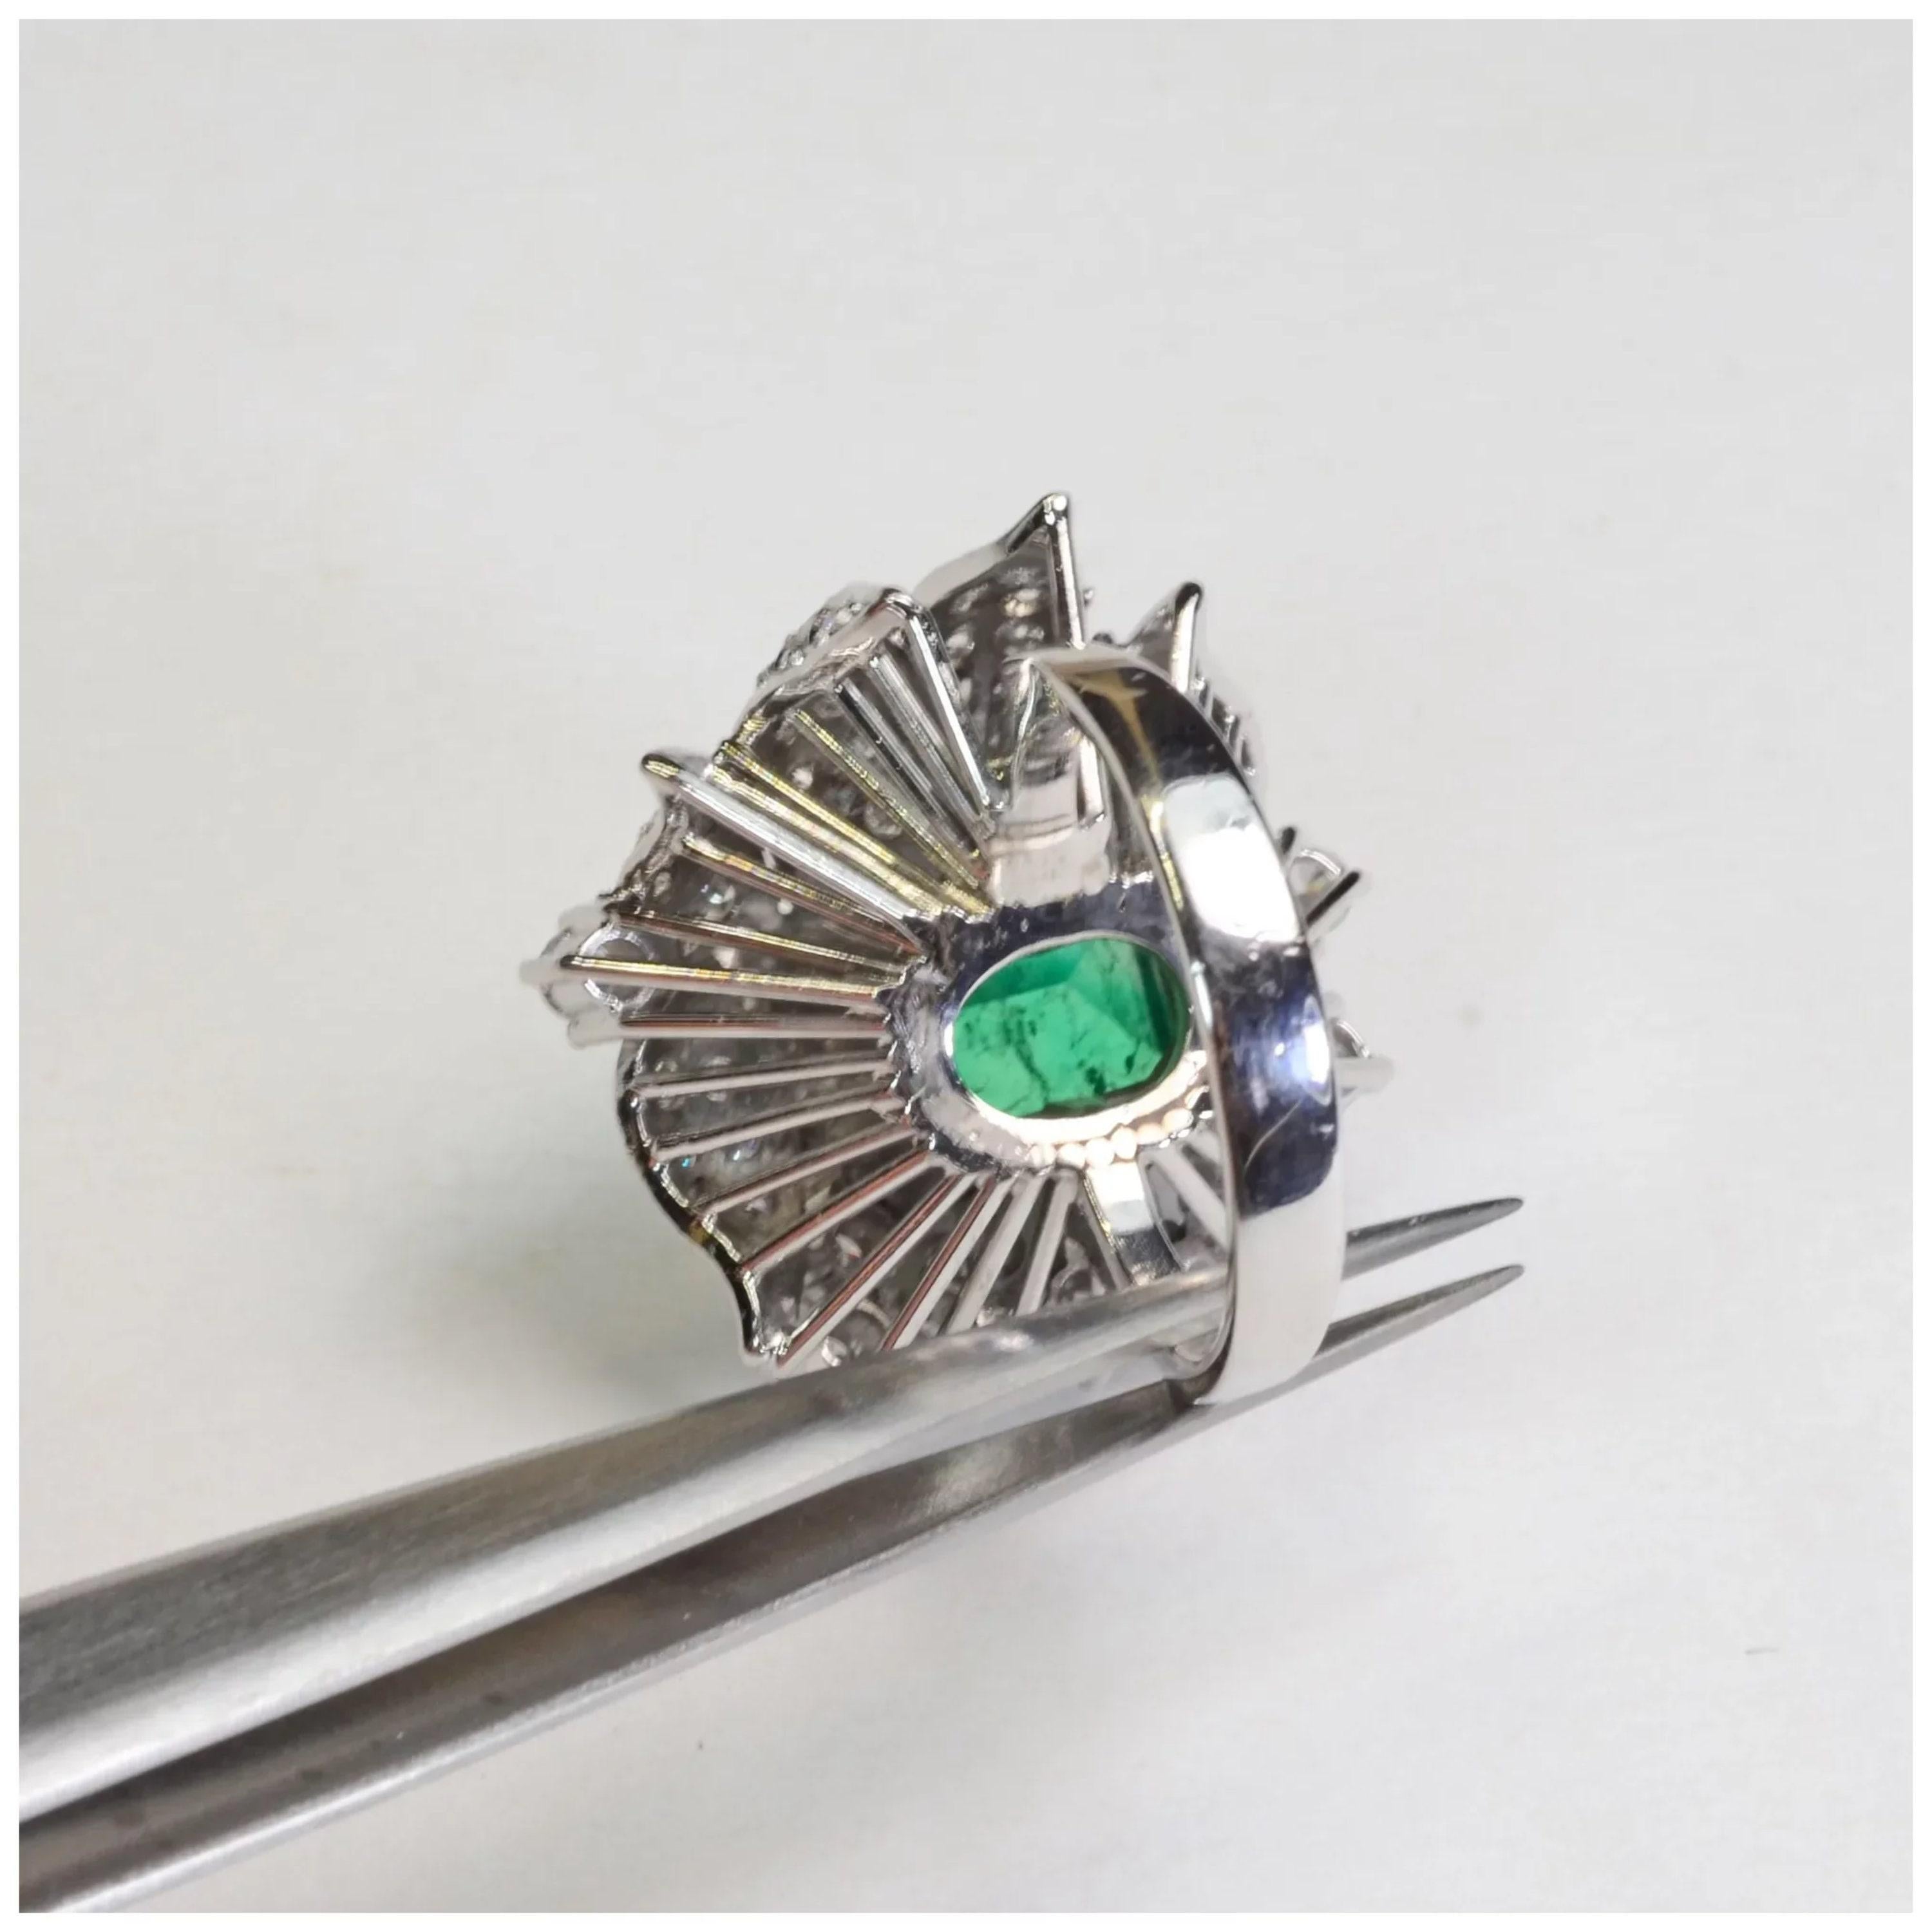 For Sale:  3 Carat Colombian Emerald Diamond Engagement Wedding Ring White Gold Cocktail  3